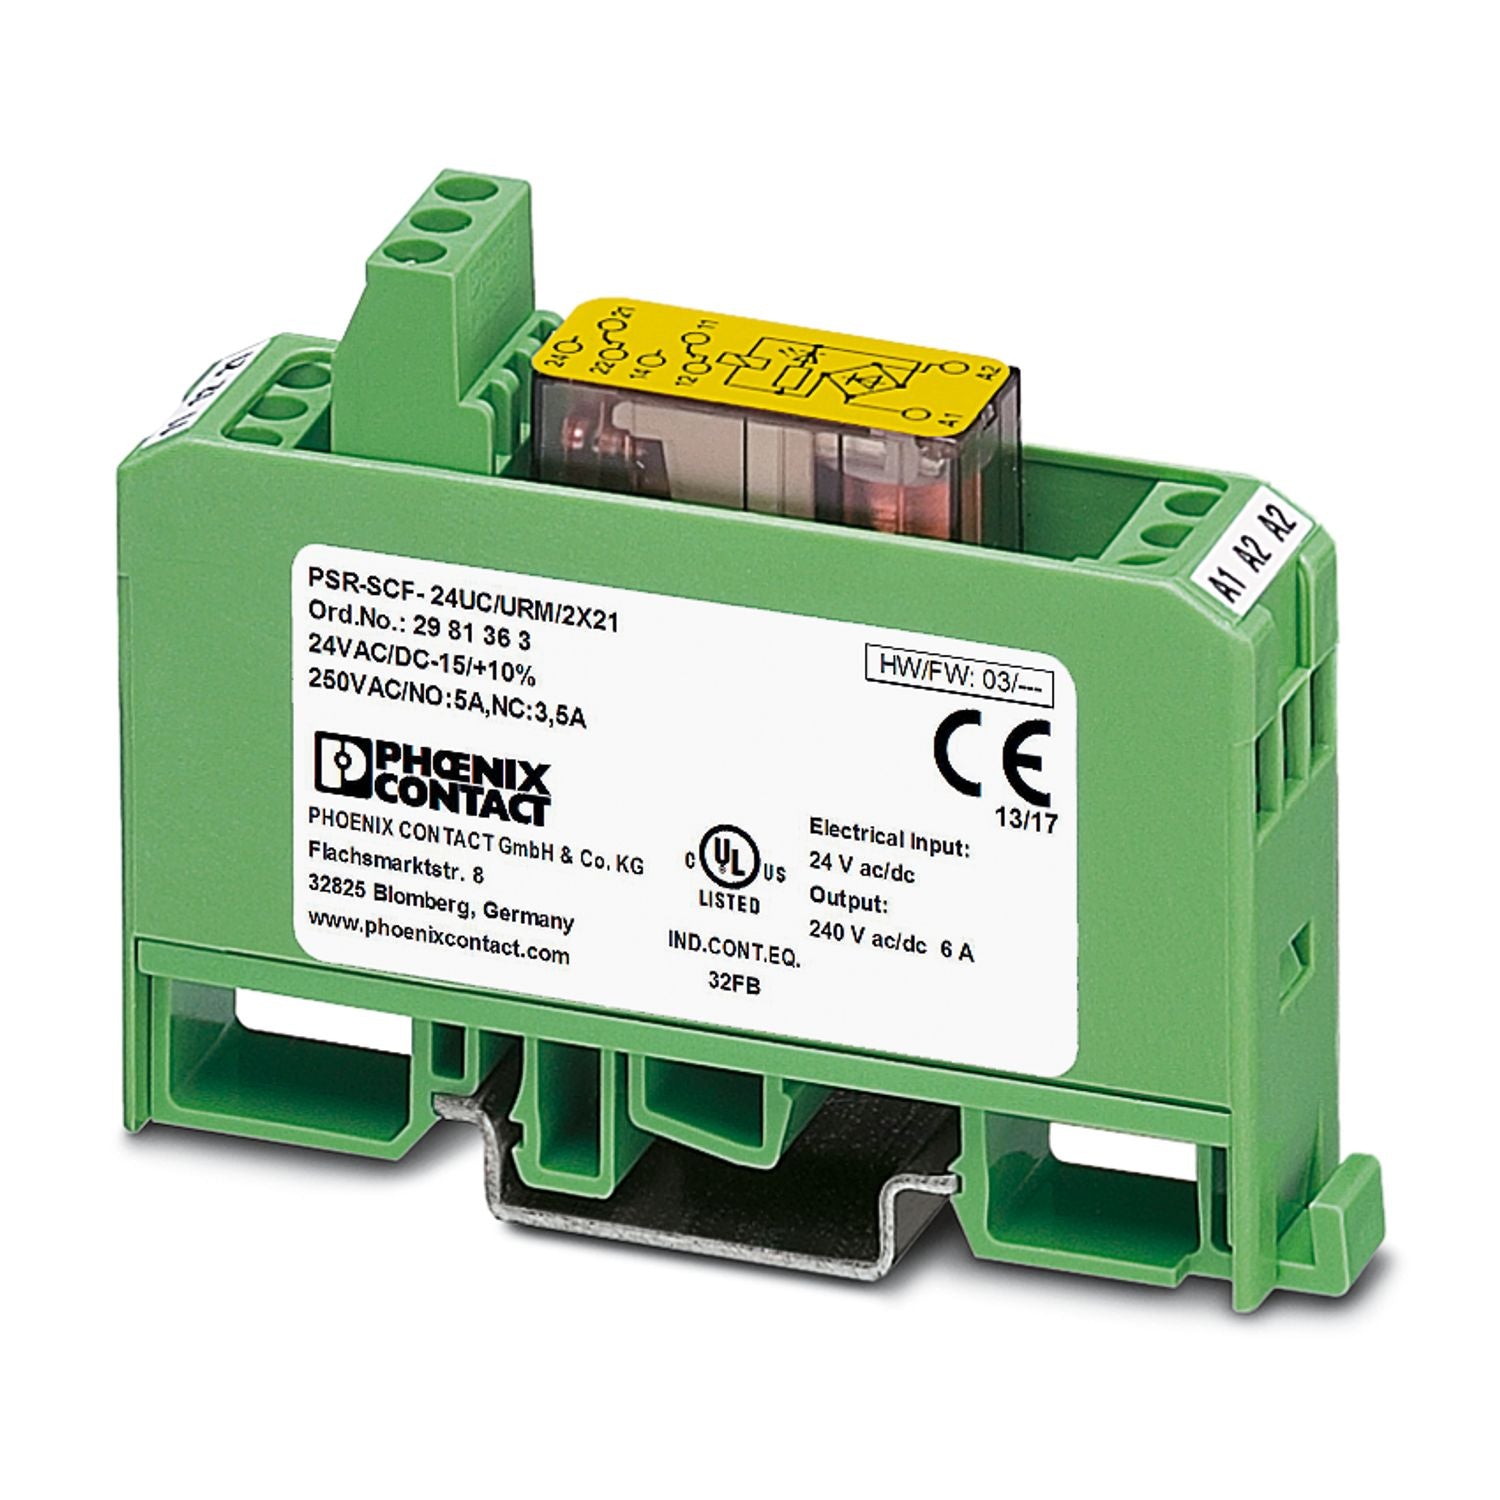 2981363 | Phoenix Contact | Safety Relays, Safety, 1 Channel, 250 VAC/VDC, PSR CLASSIC Series